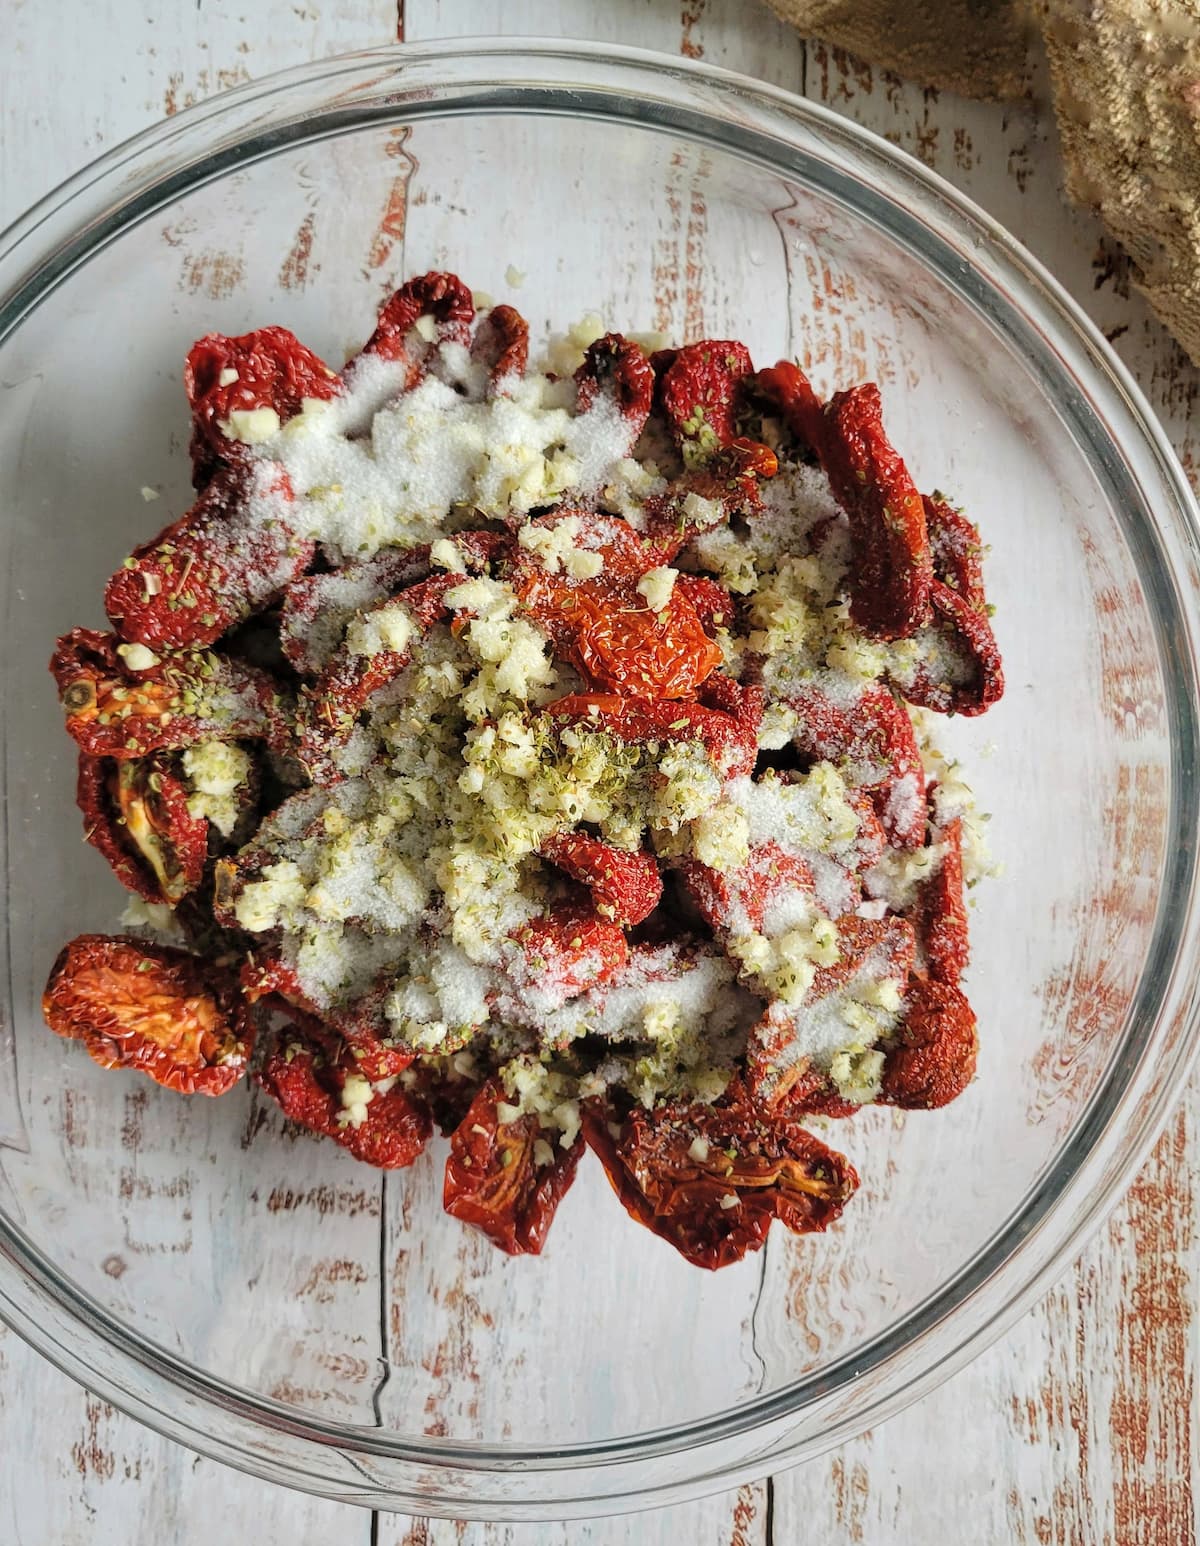 sun dried tomatoes in a bowl with garlic and spices